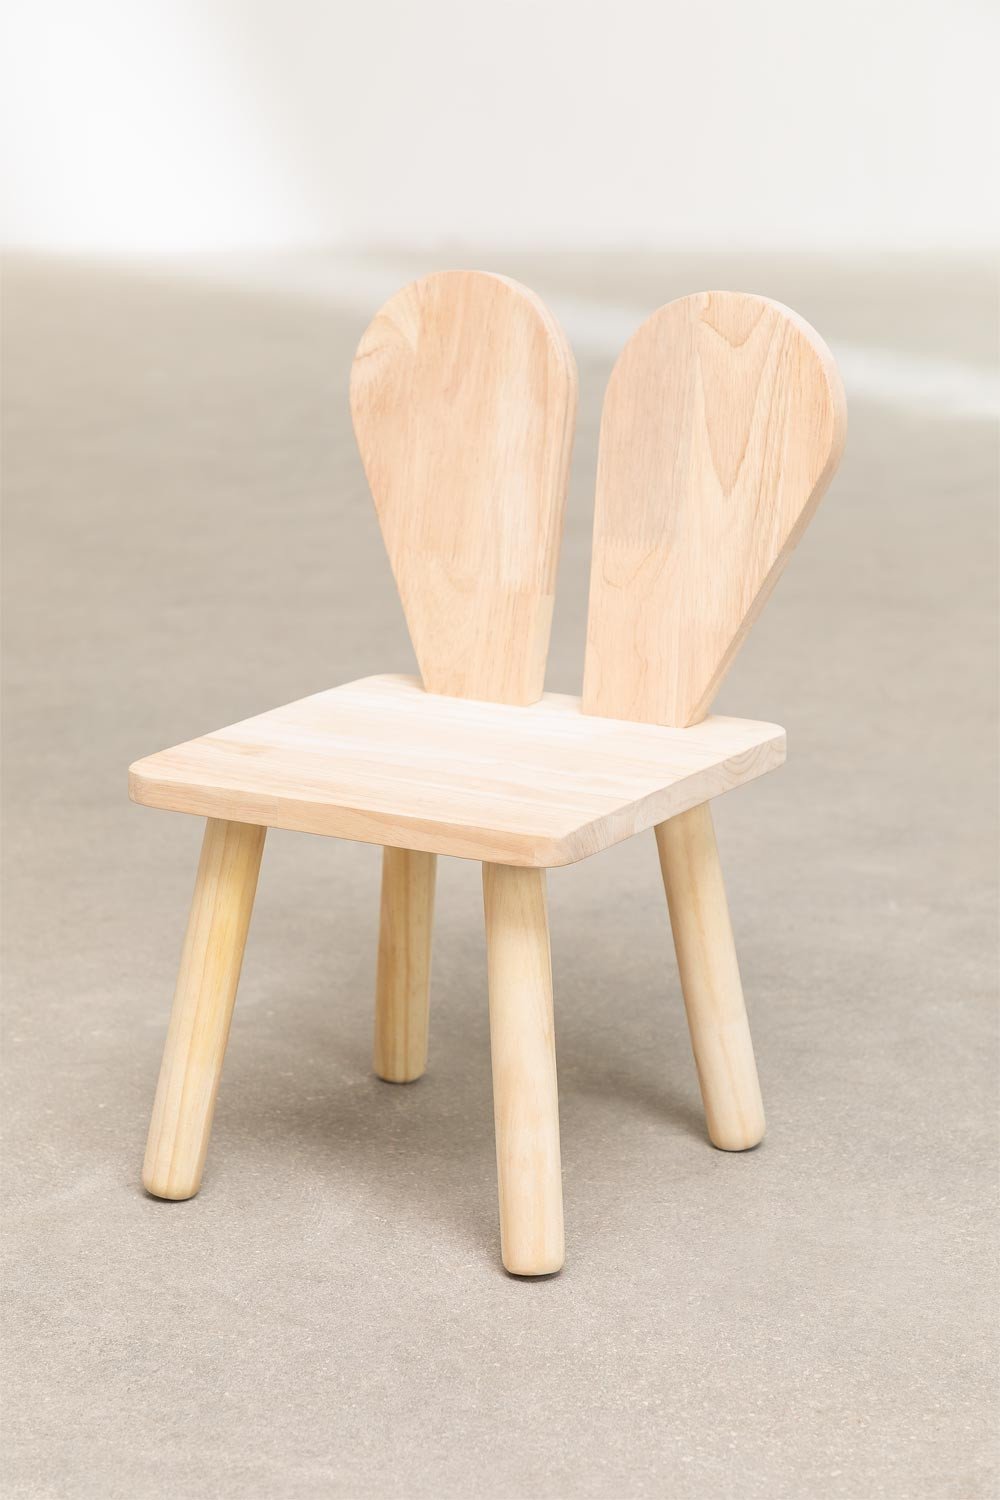  Wooden Chair Buny Style Kids, gallery image 2